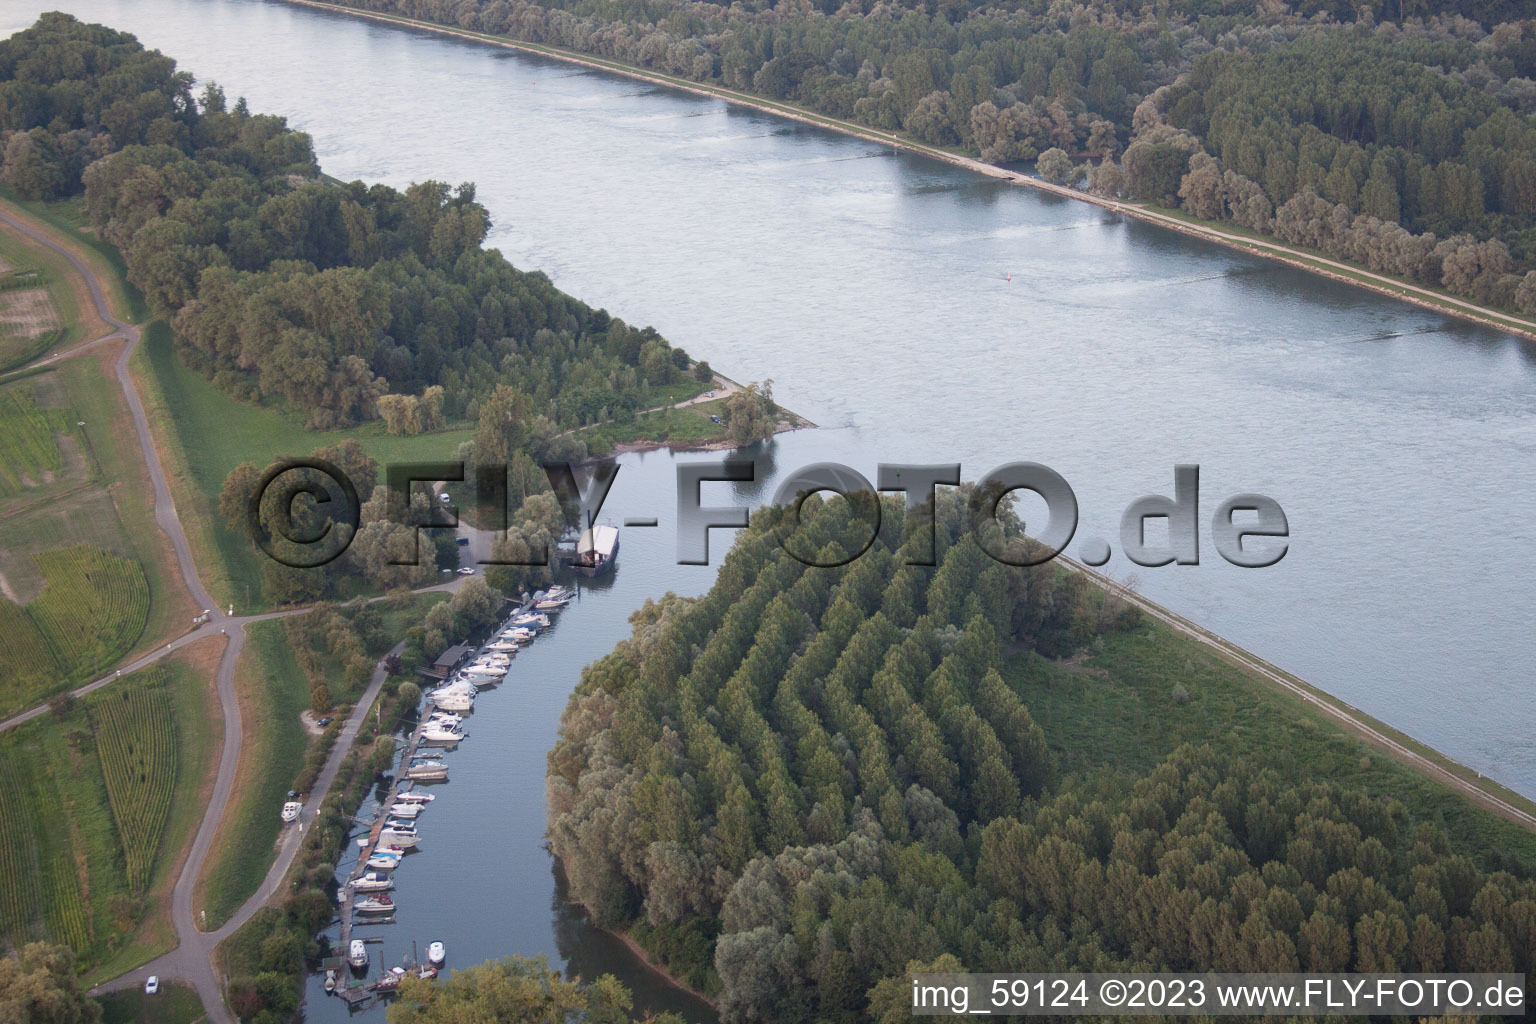 Aerial photograpy of Lautermuschel in Neuburg in the state Rhineland-Palatinate, Germany